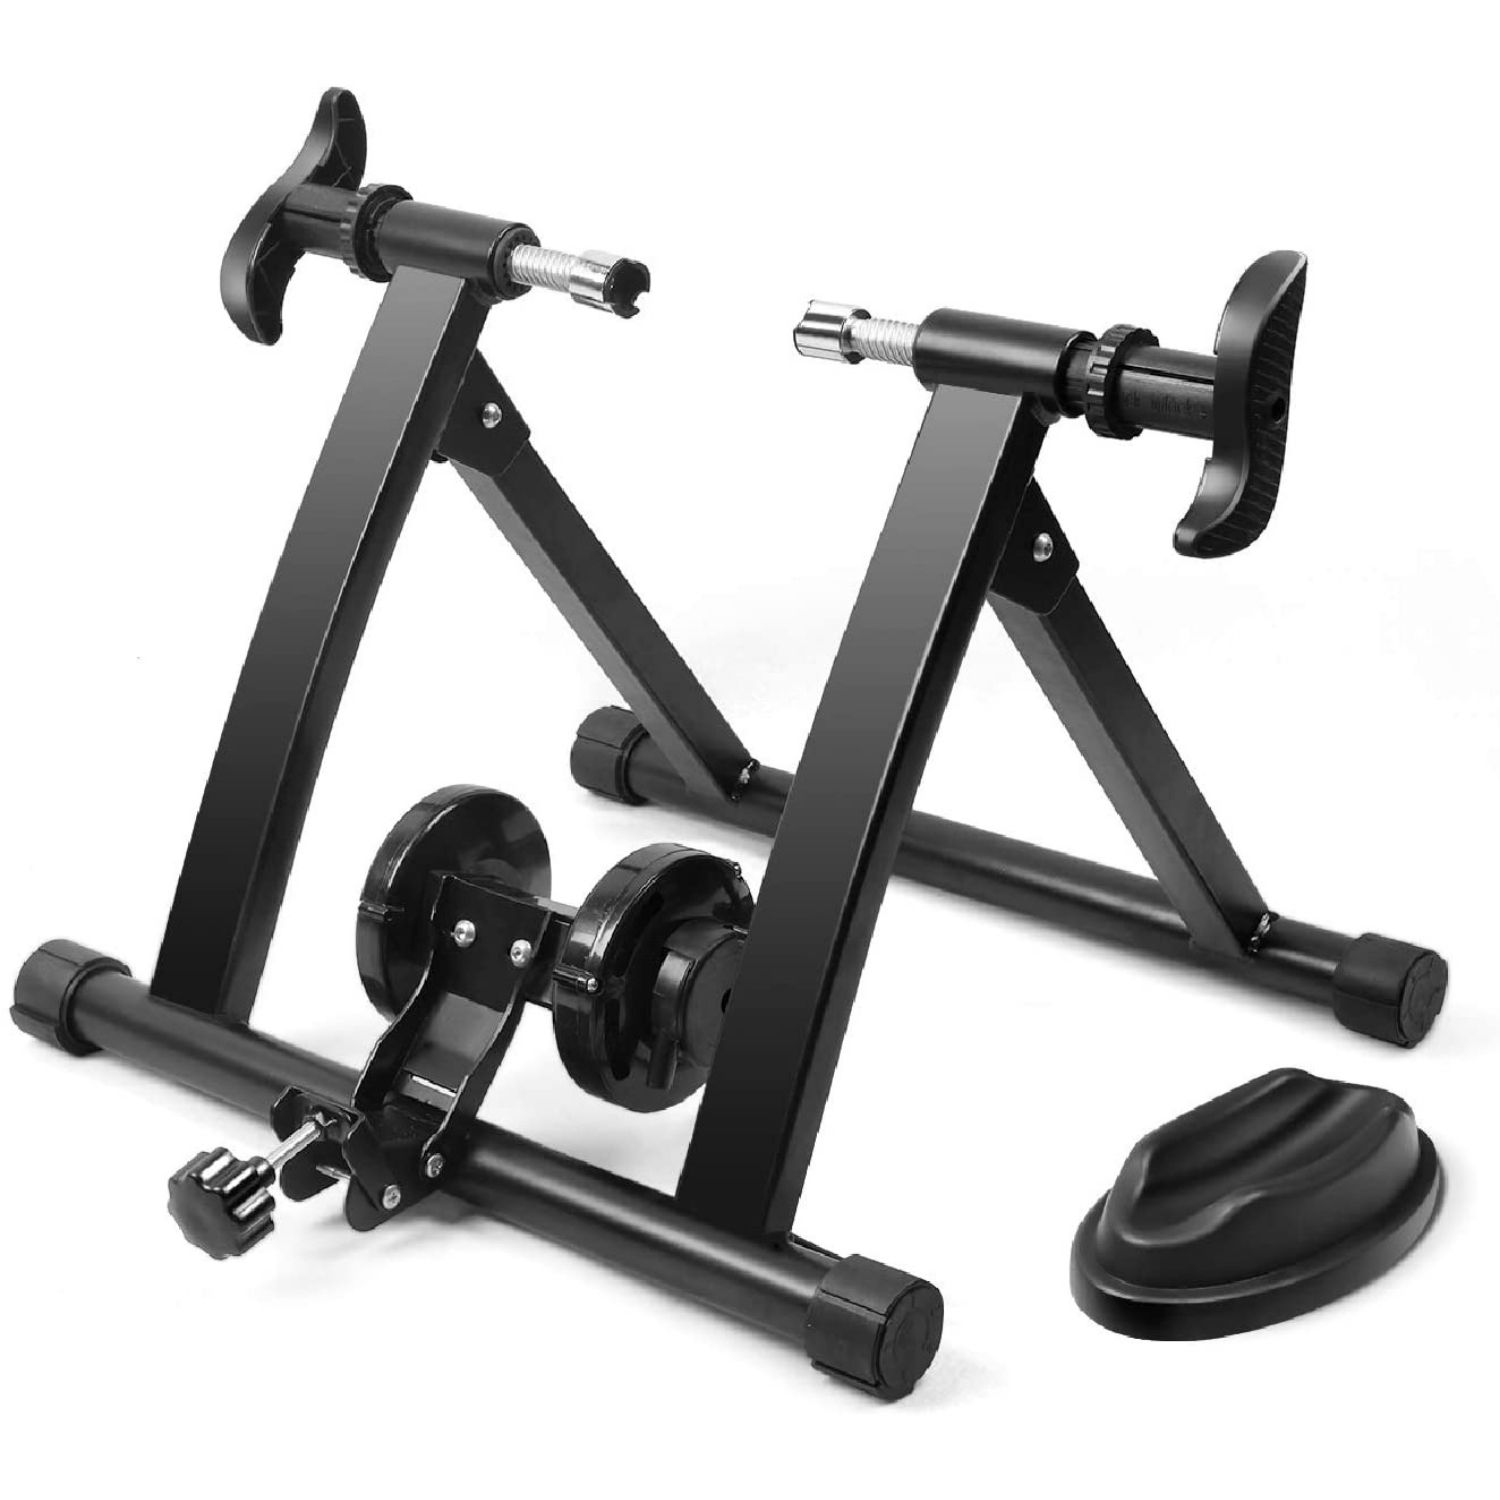 front wheel stand for turbo trainer